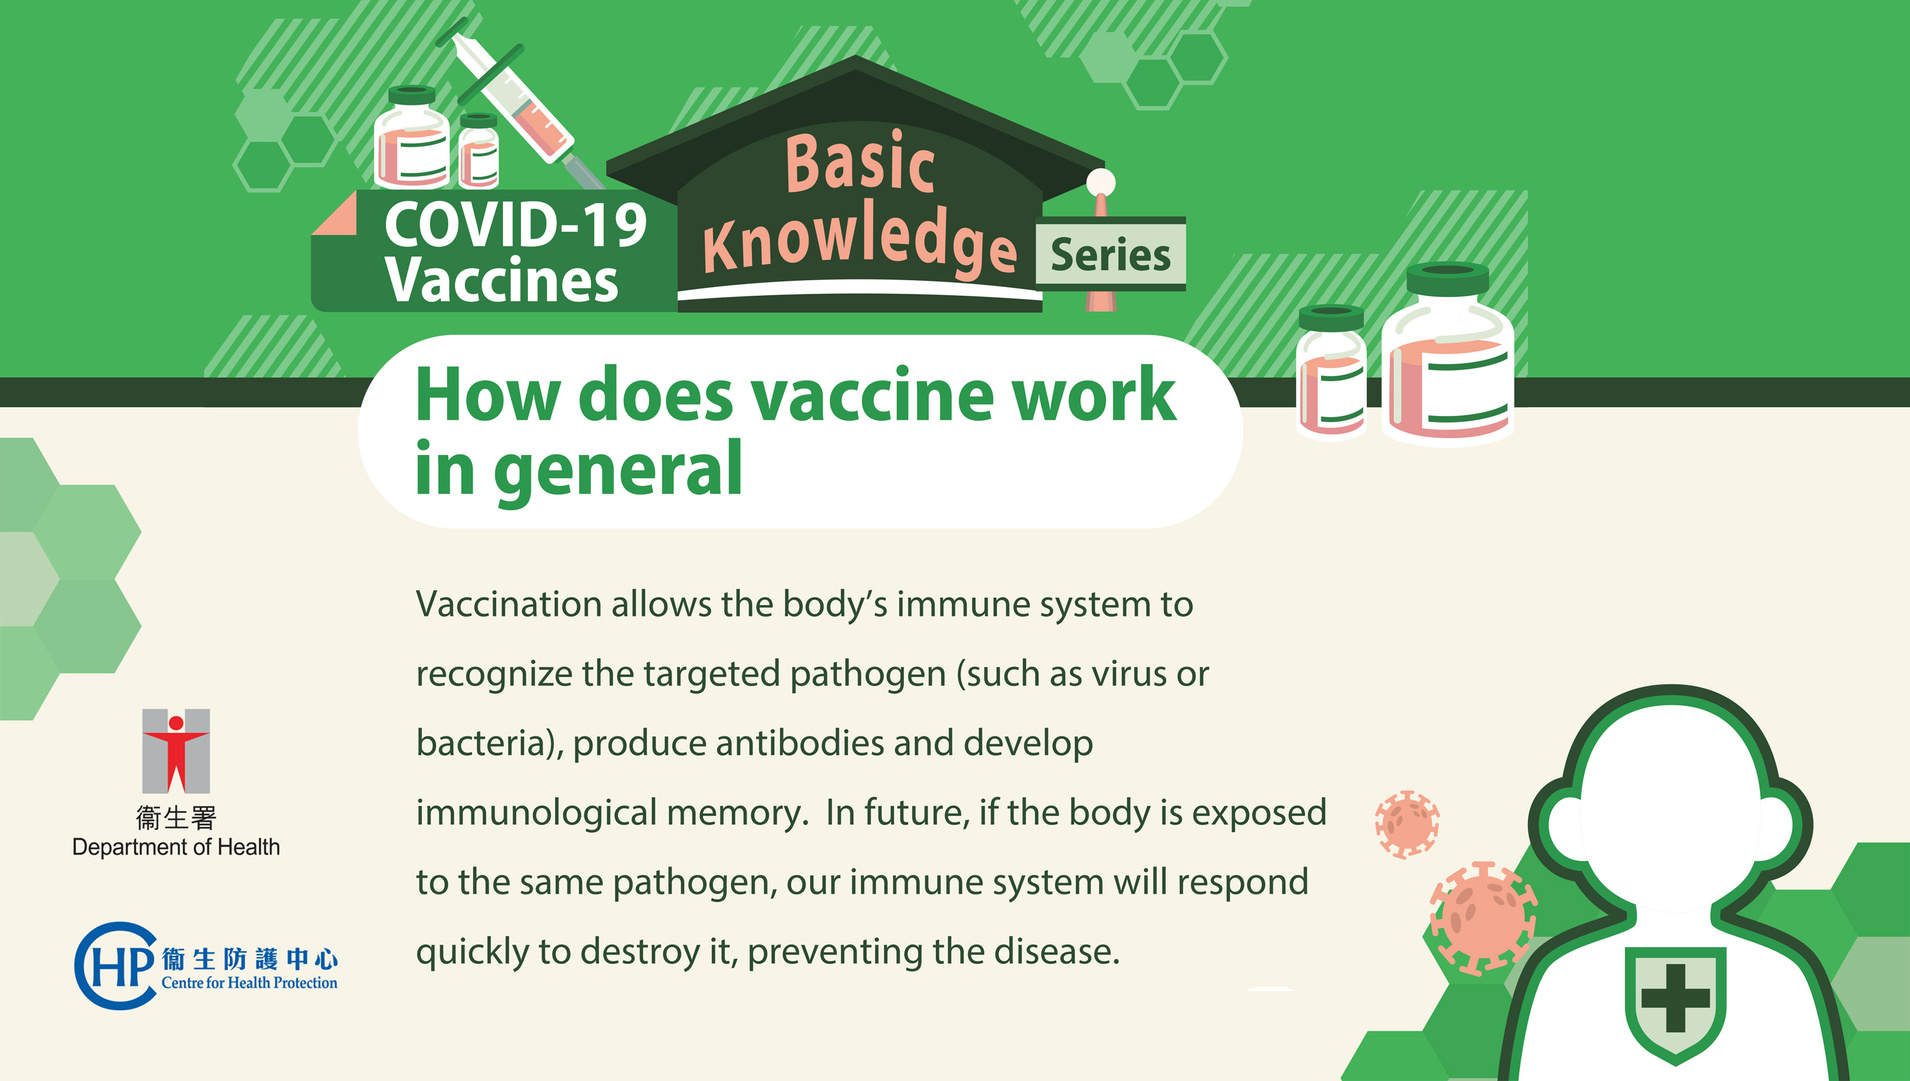 COVID-19 Vaccines Basic Knowledge Series 1-2